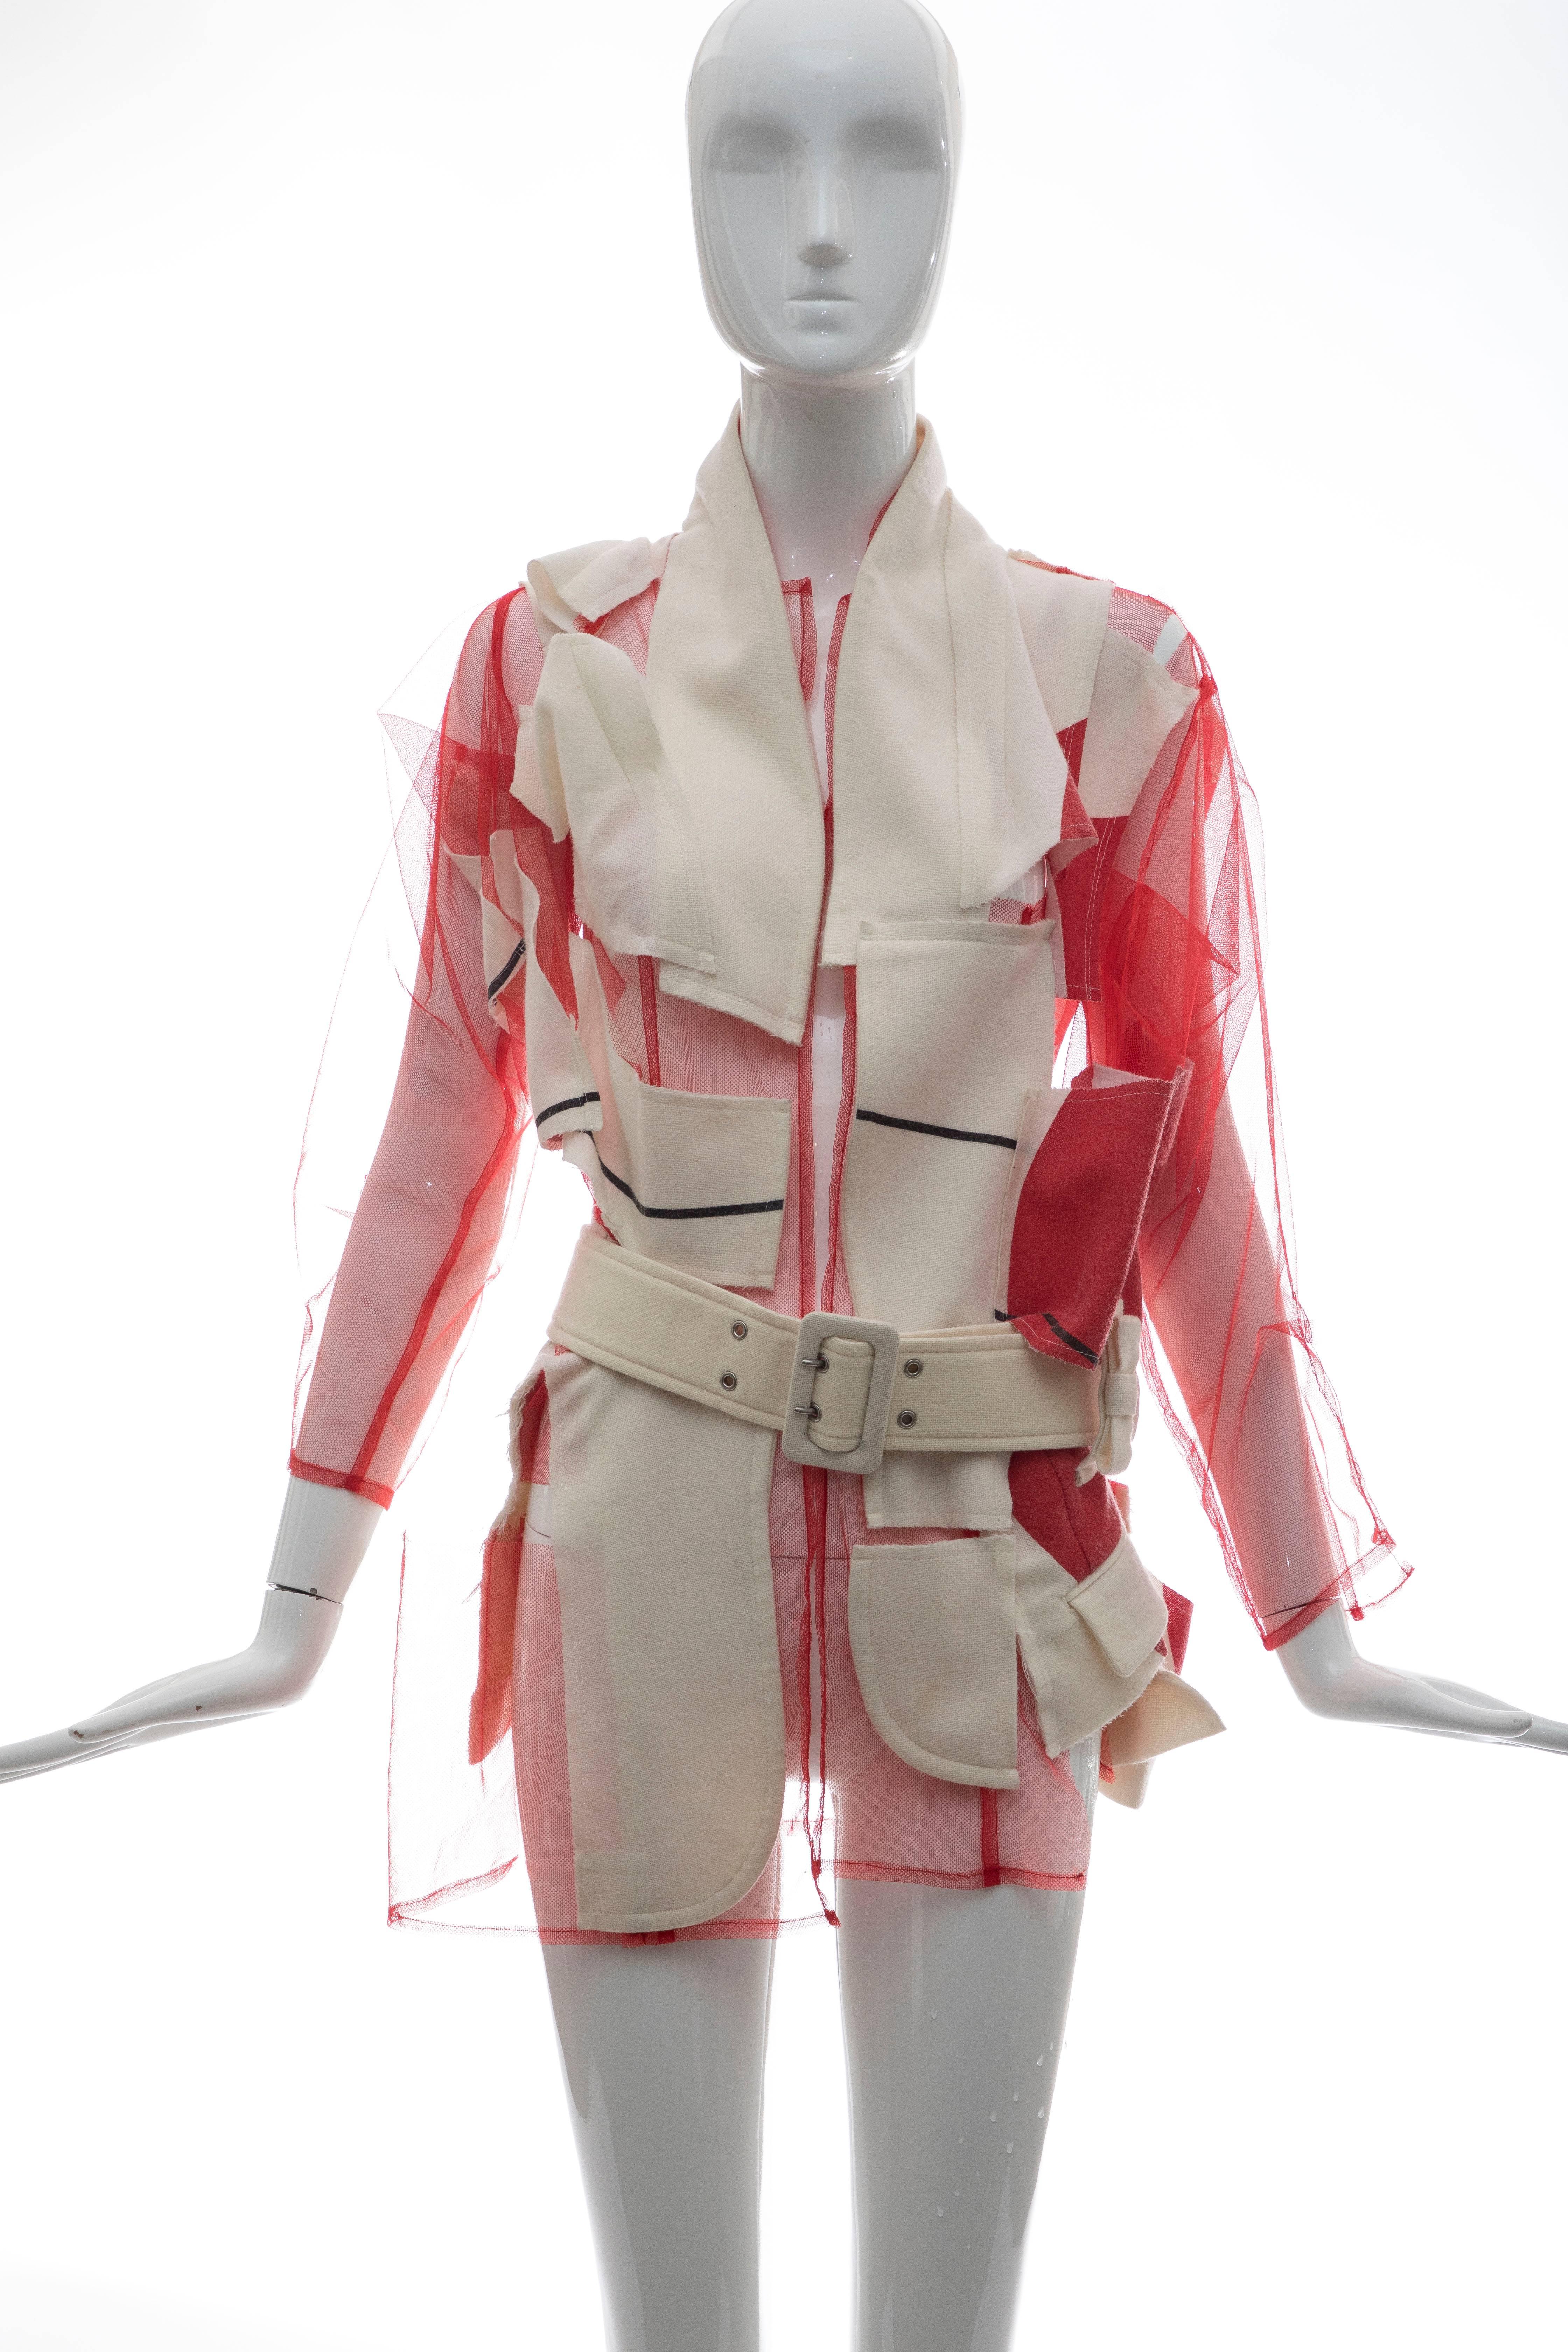 Comme des garcons Spring 2007 deconstructed red mesh jacket with cream wool patchwork throughout and cream wool belt at waist.

Bust: 40, Waist 32, Shoulder 15, Length 30, Sleeve 26
